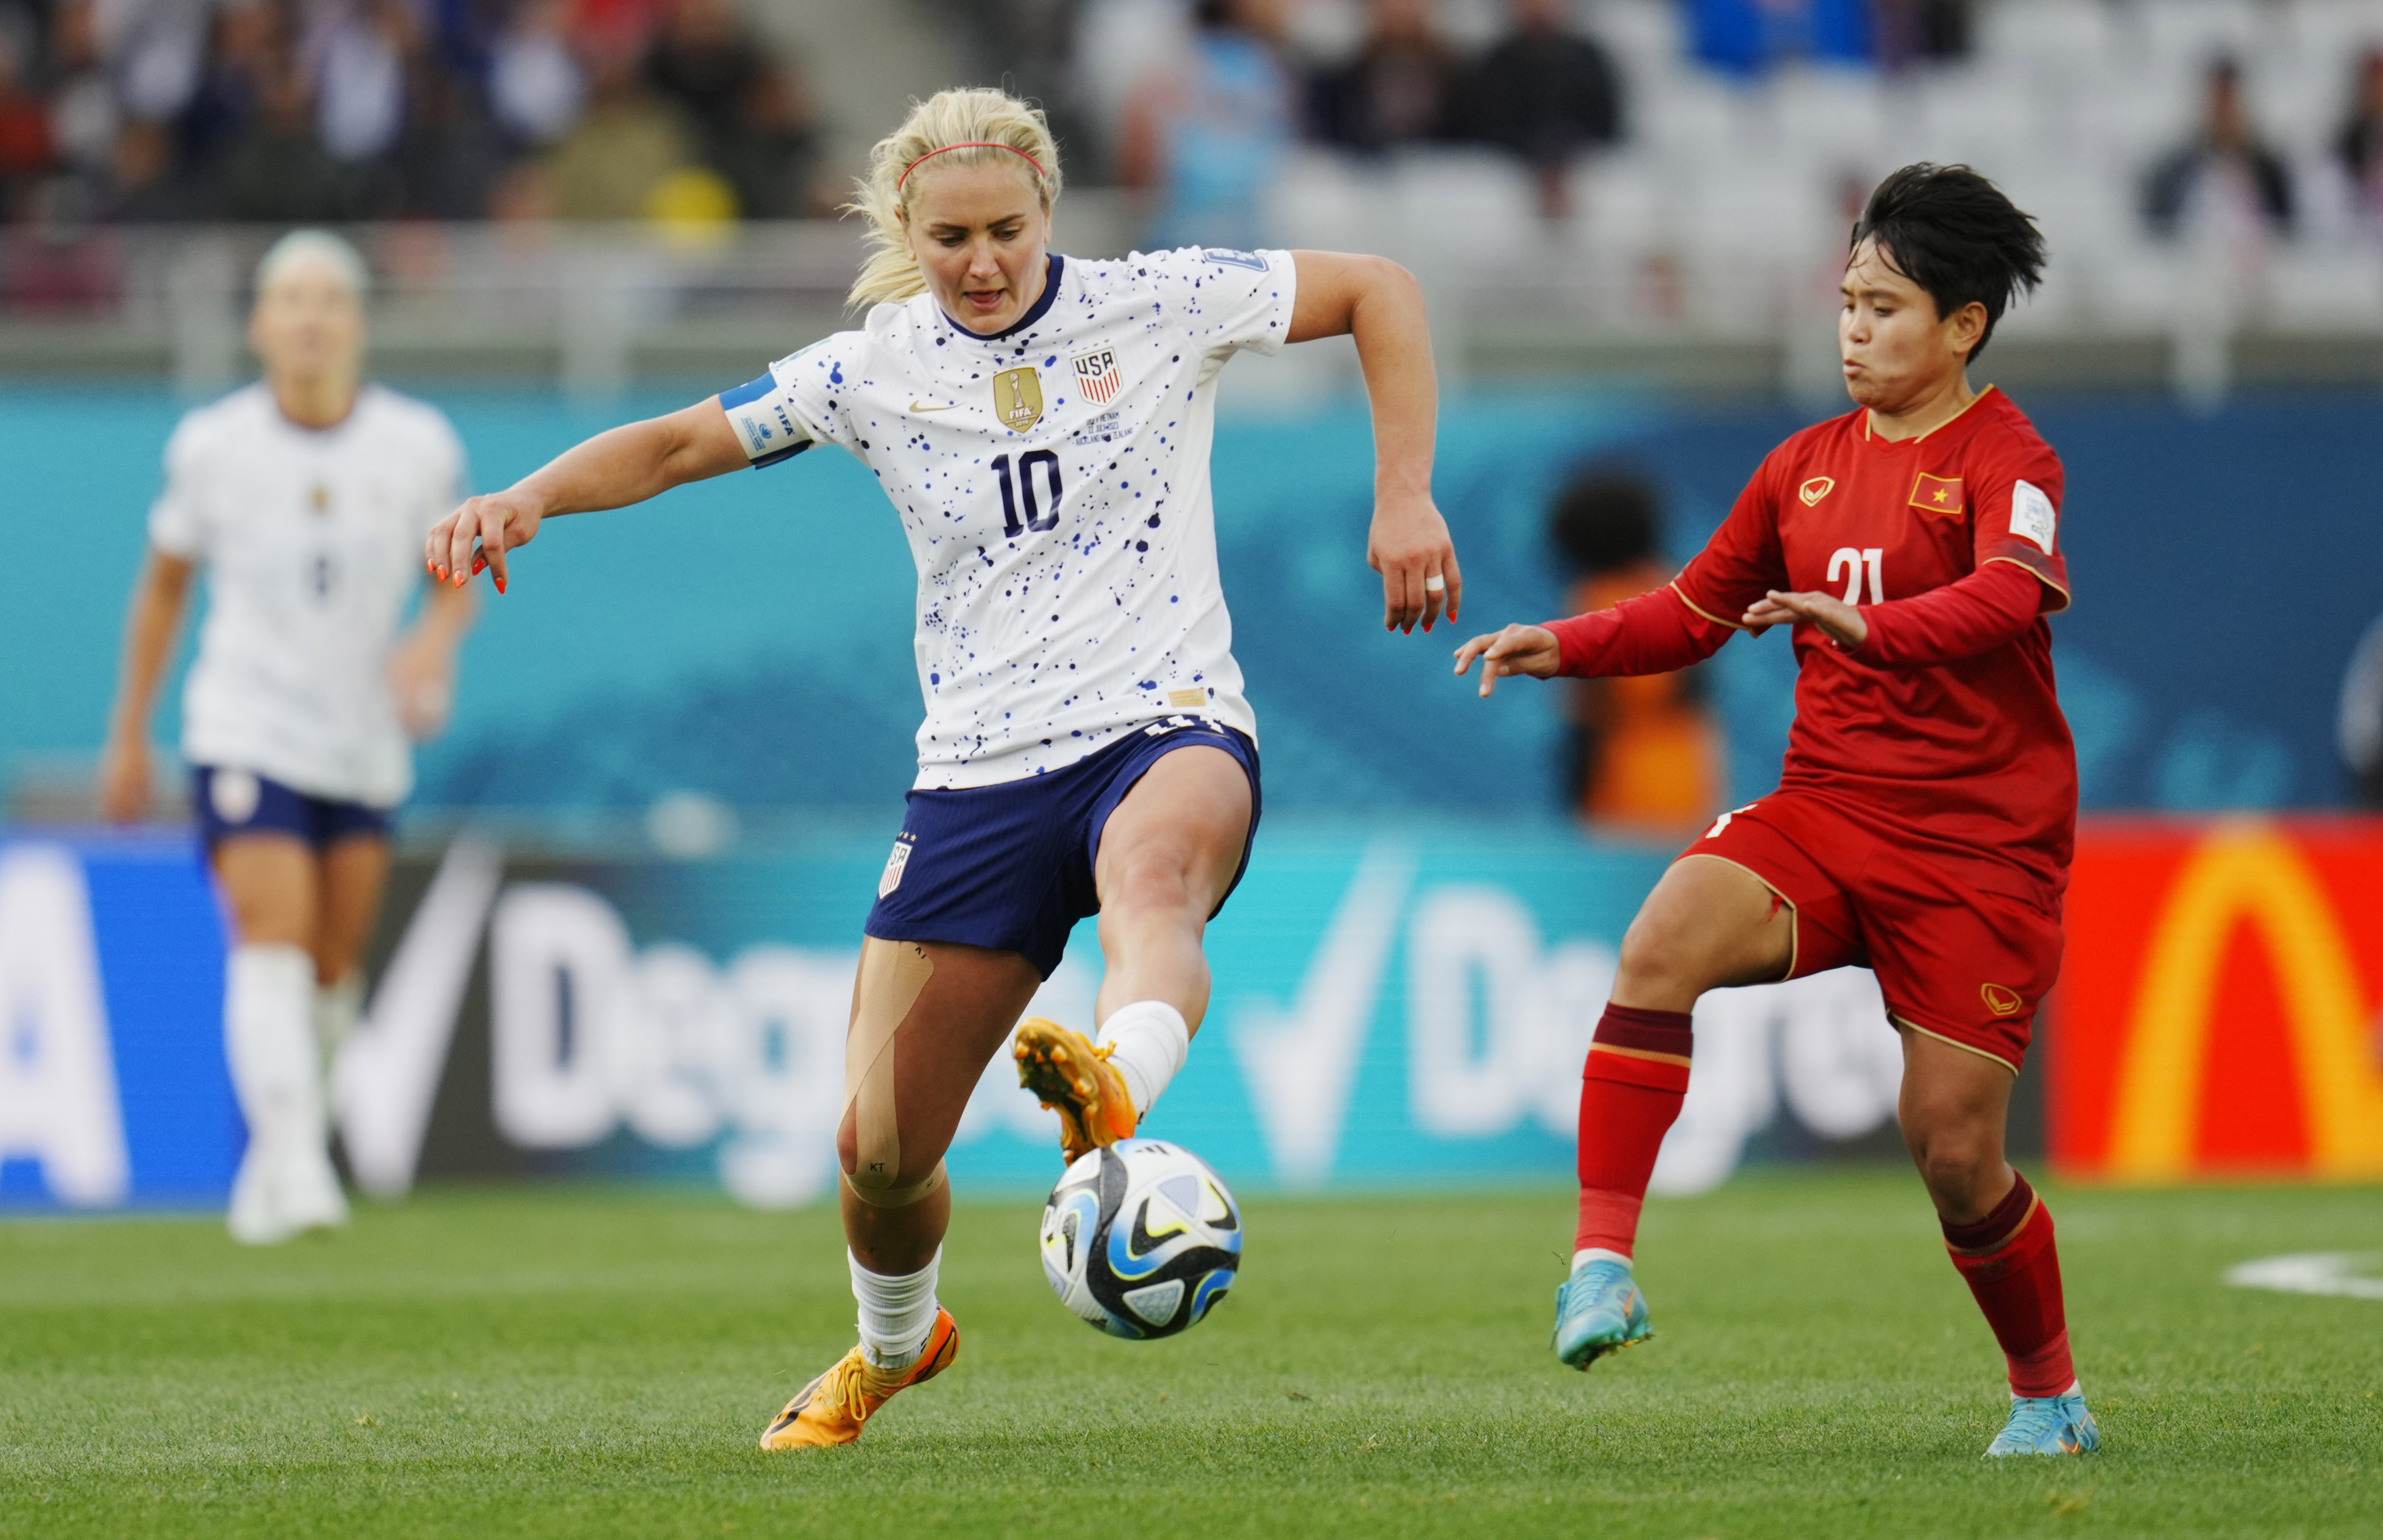 United States' Lindsey Horan and Vietnam's Thi Van Su Ngan battle for the ball during the match between the United States and Vietnam on July 22.